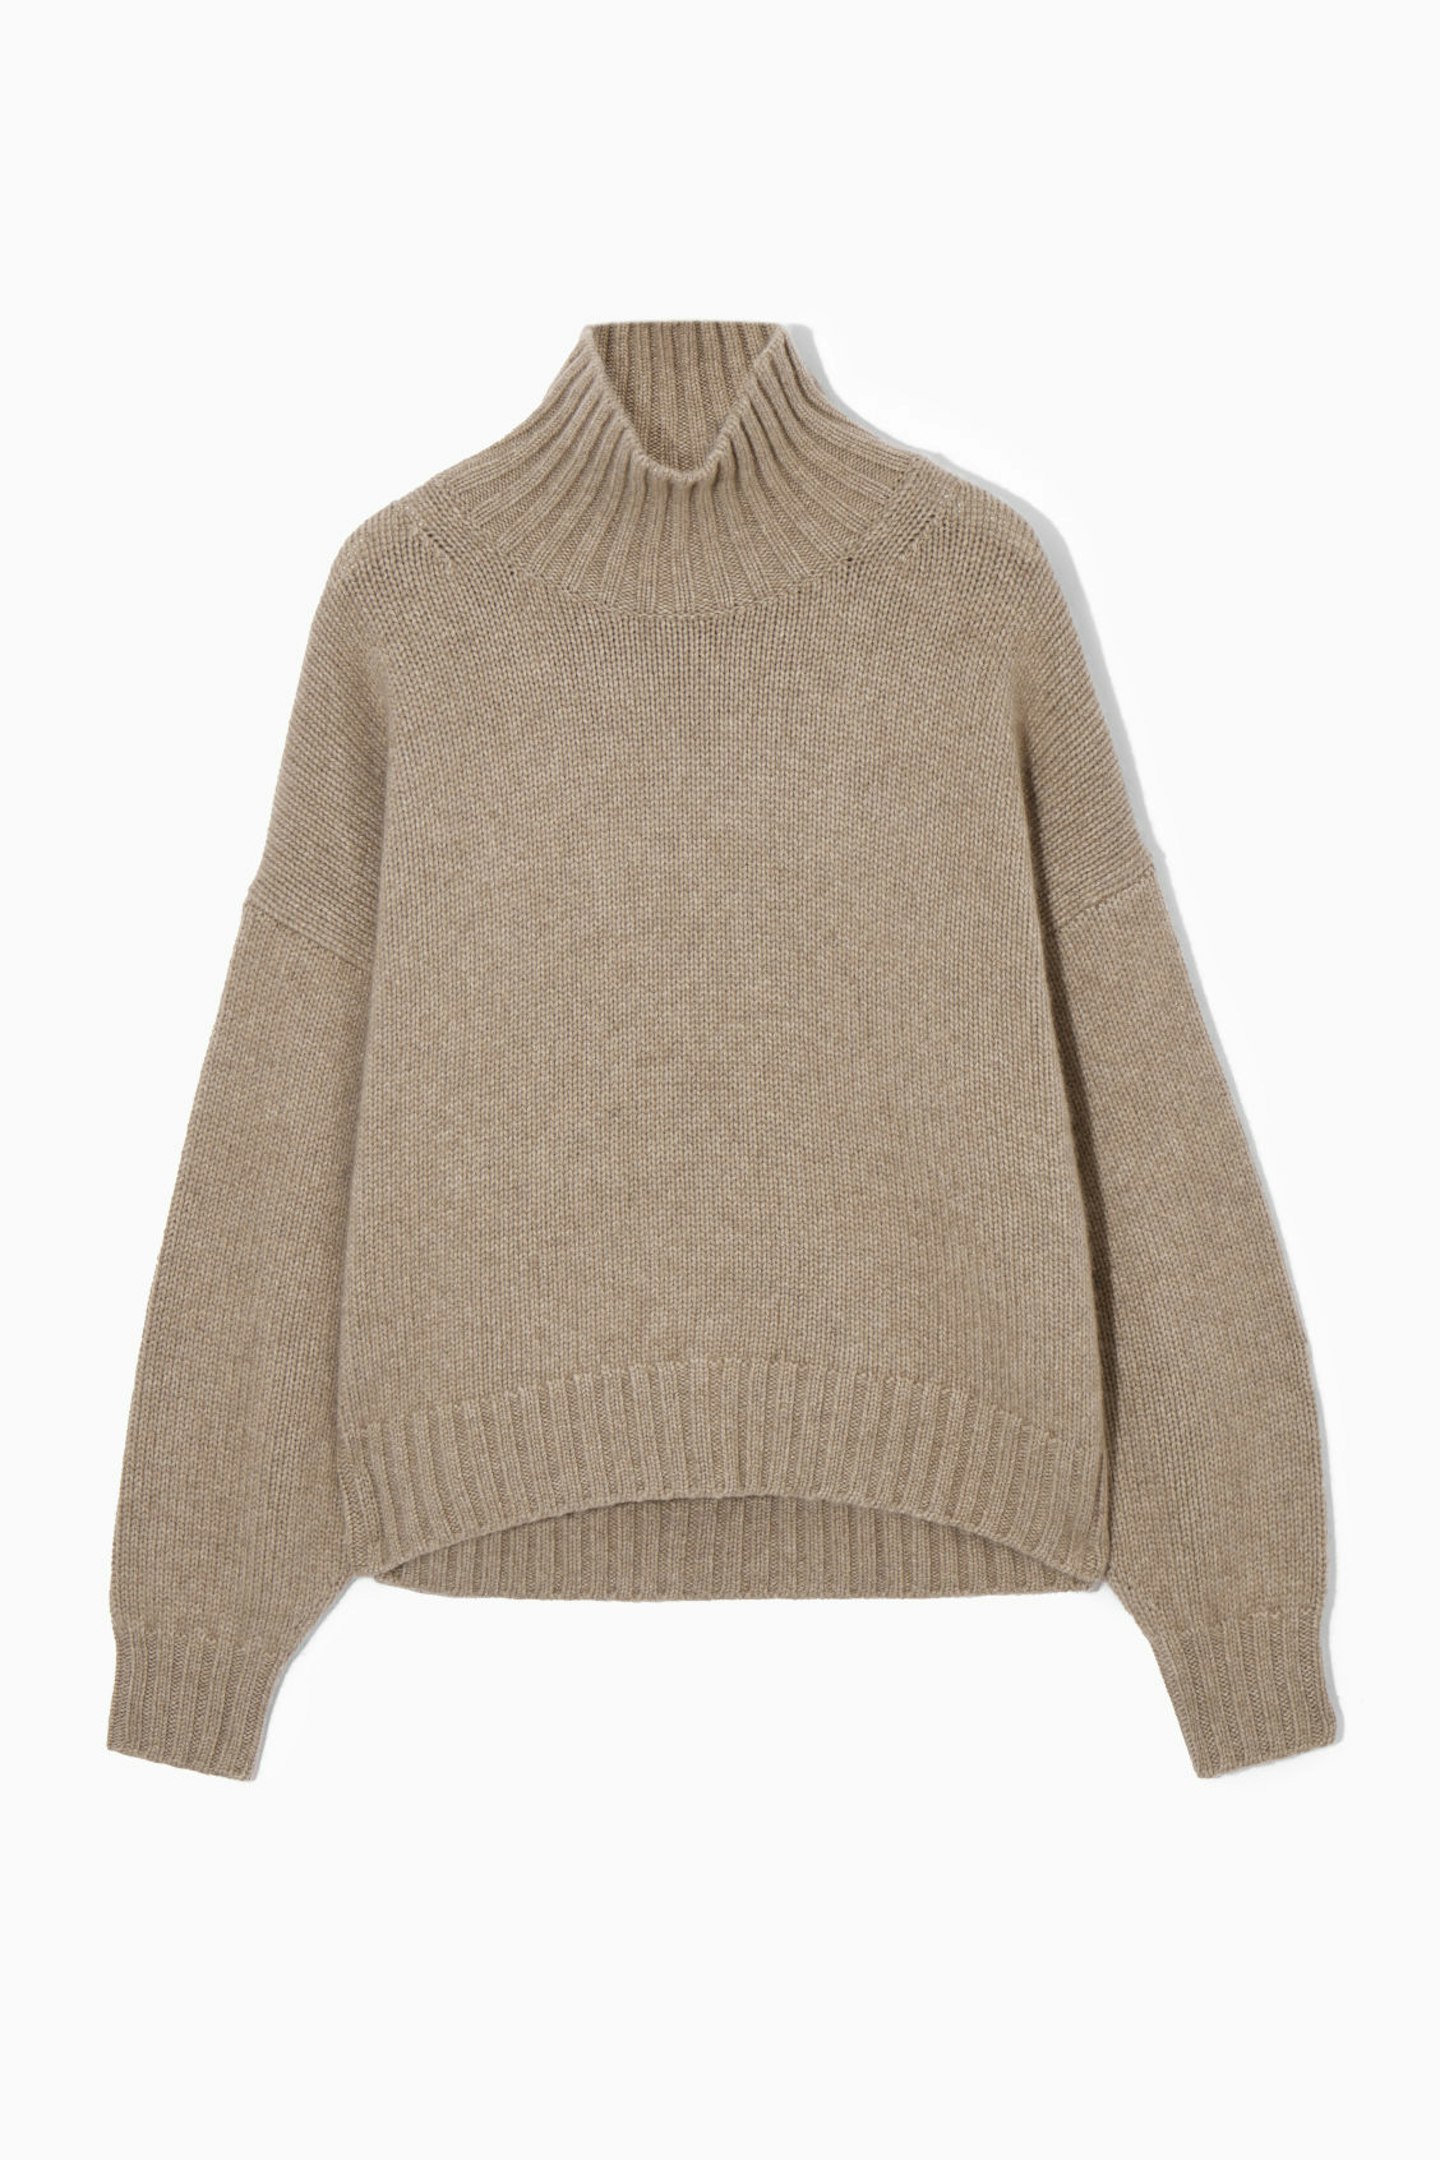 COS, Chunky Pure Cashmere Turtleneck Jumper